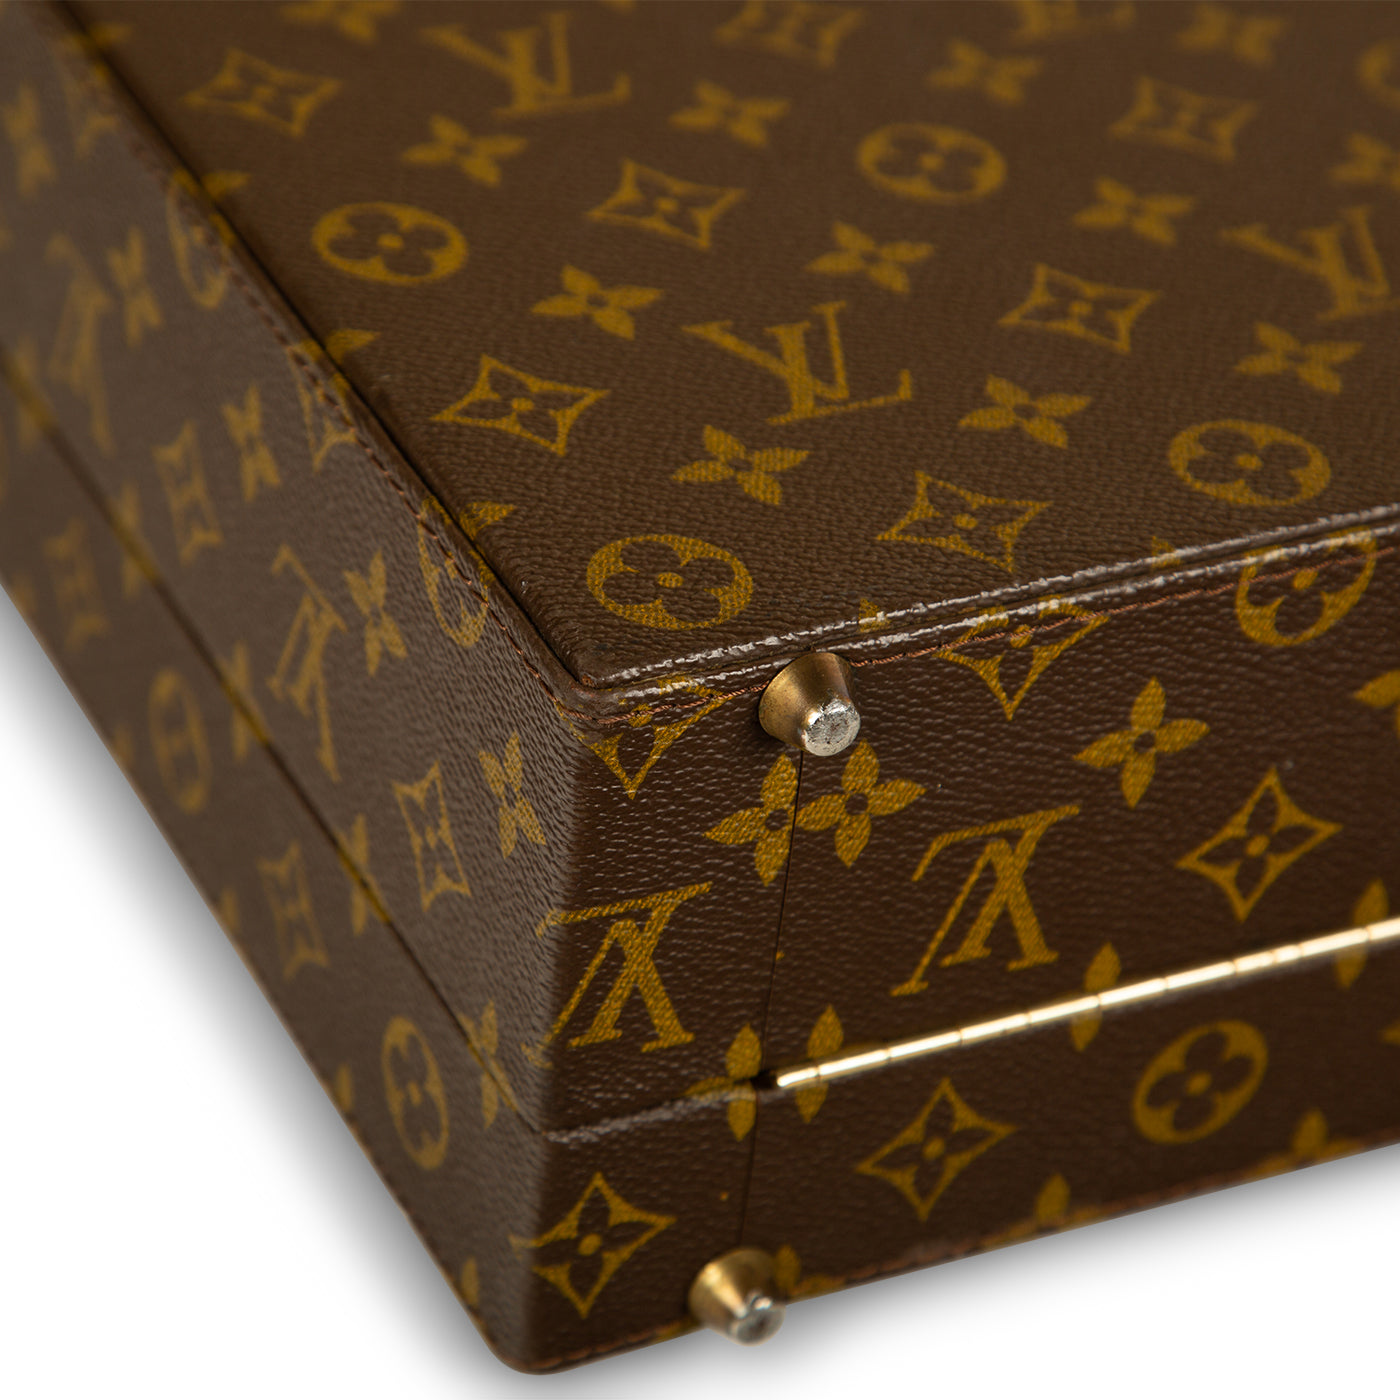 Louis Vuitton Monogram Reverse Coated Canvas Hard-Sided Briefcase